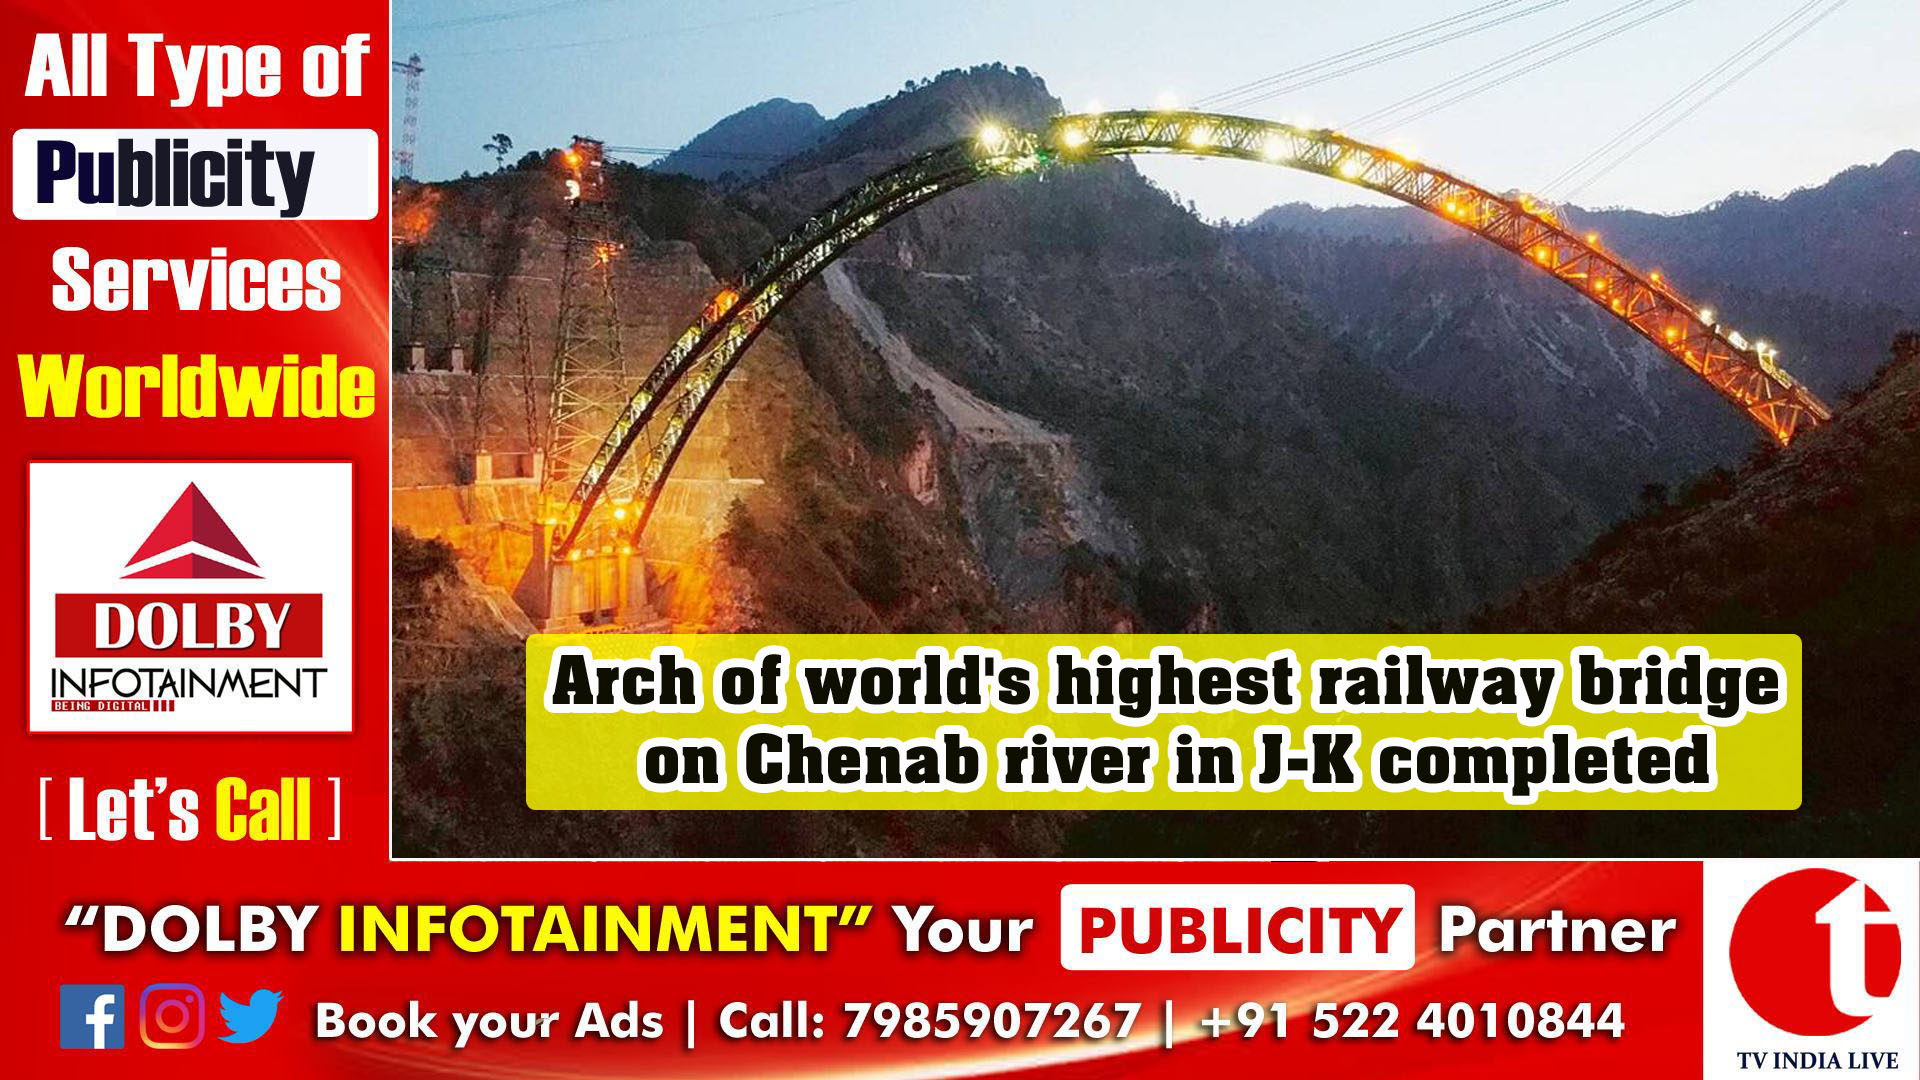 Arch of world's highest railway bridge on Chenab river in J-K completed